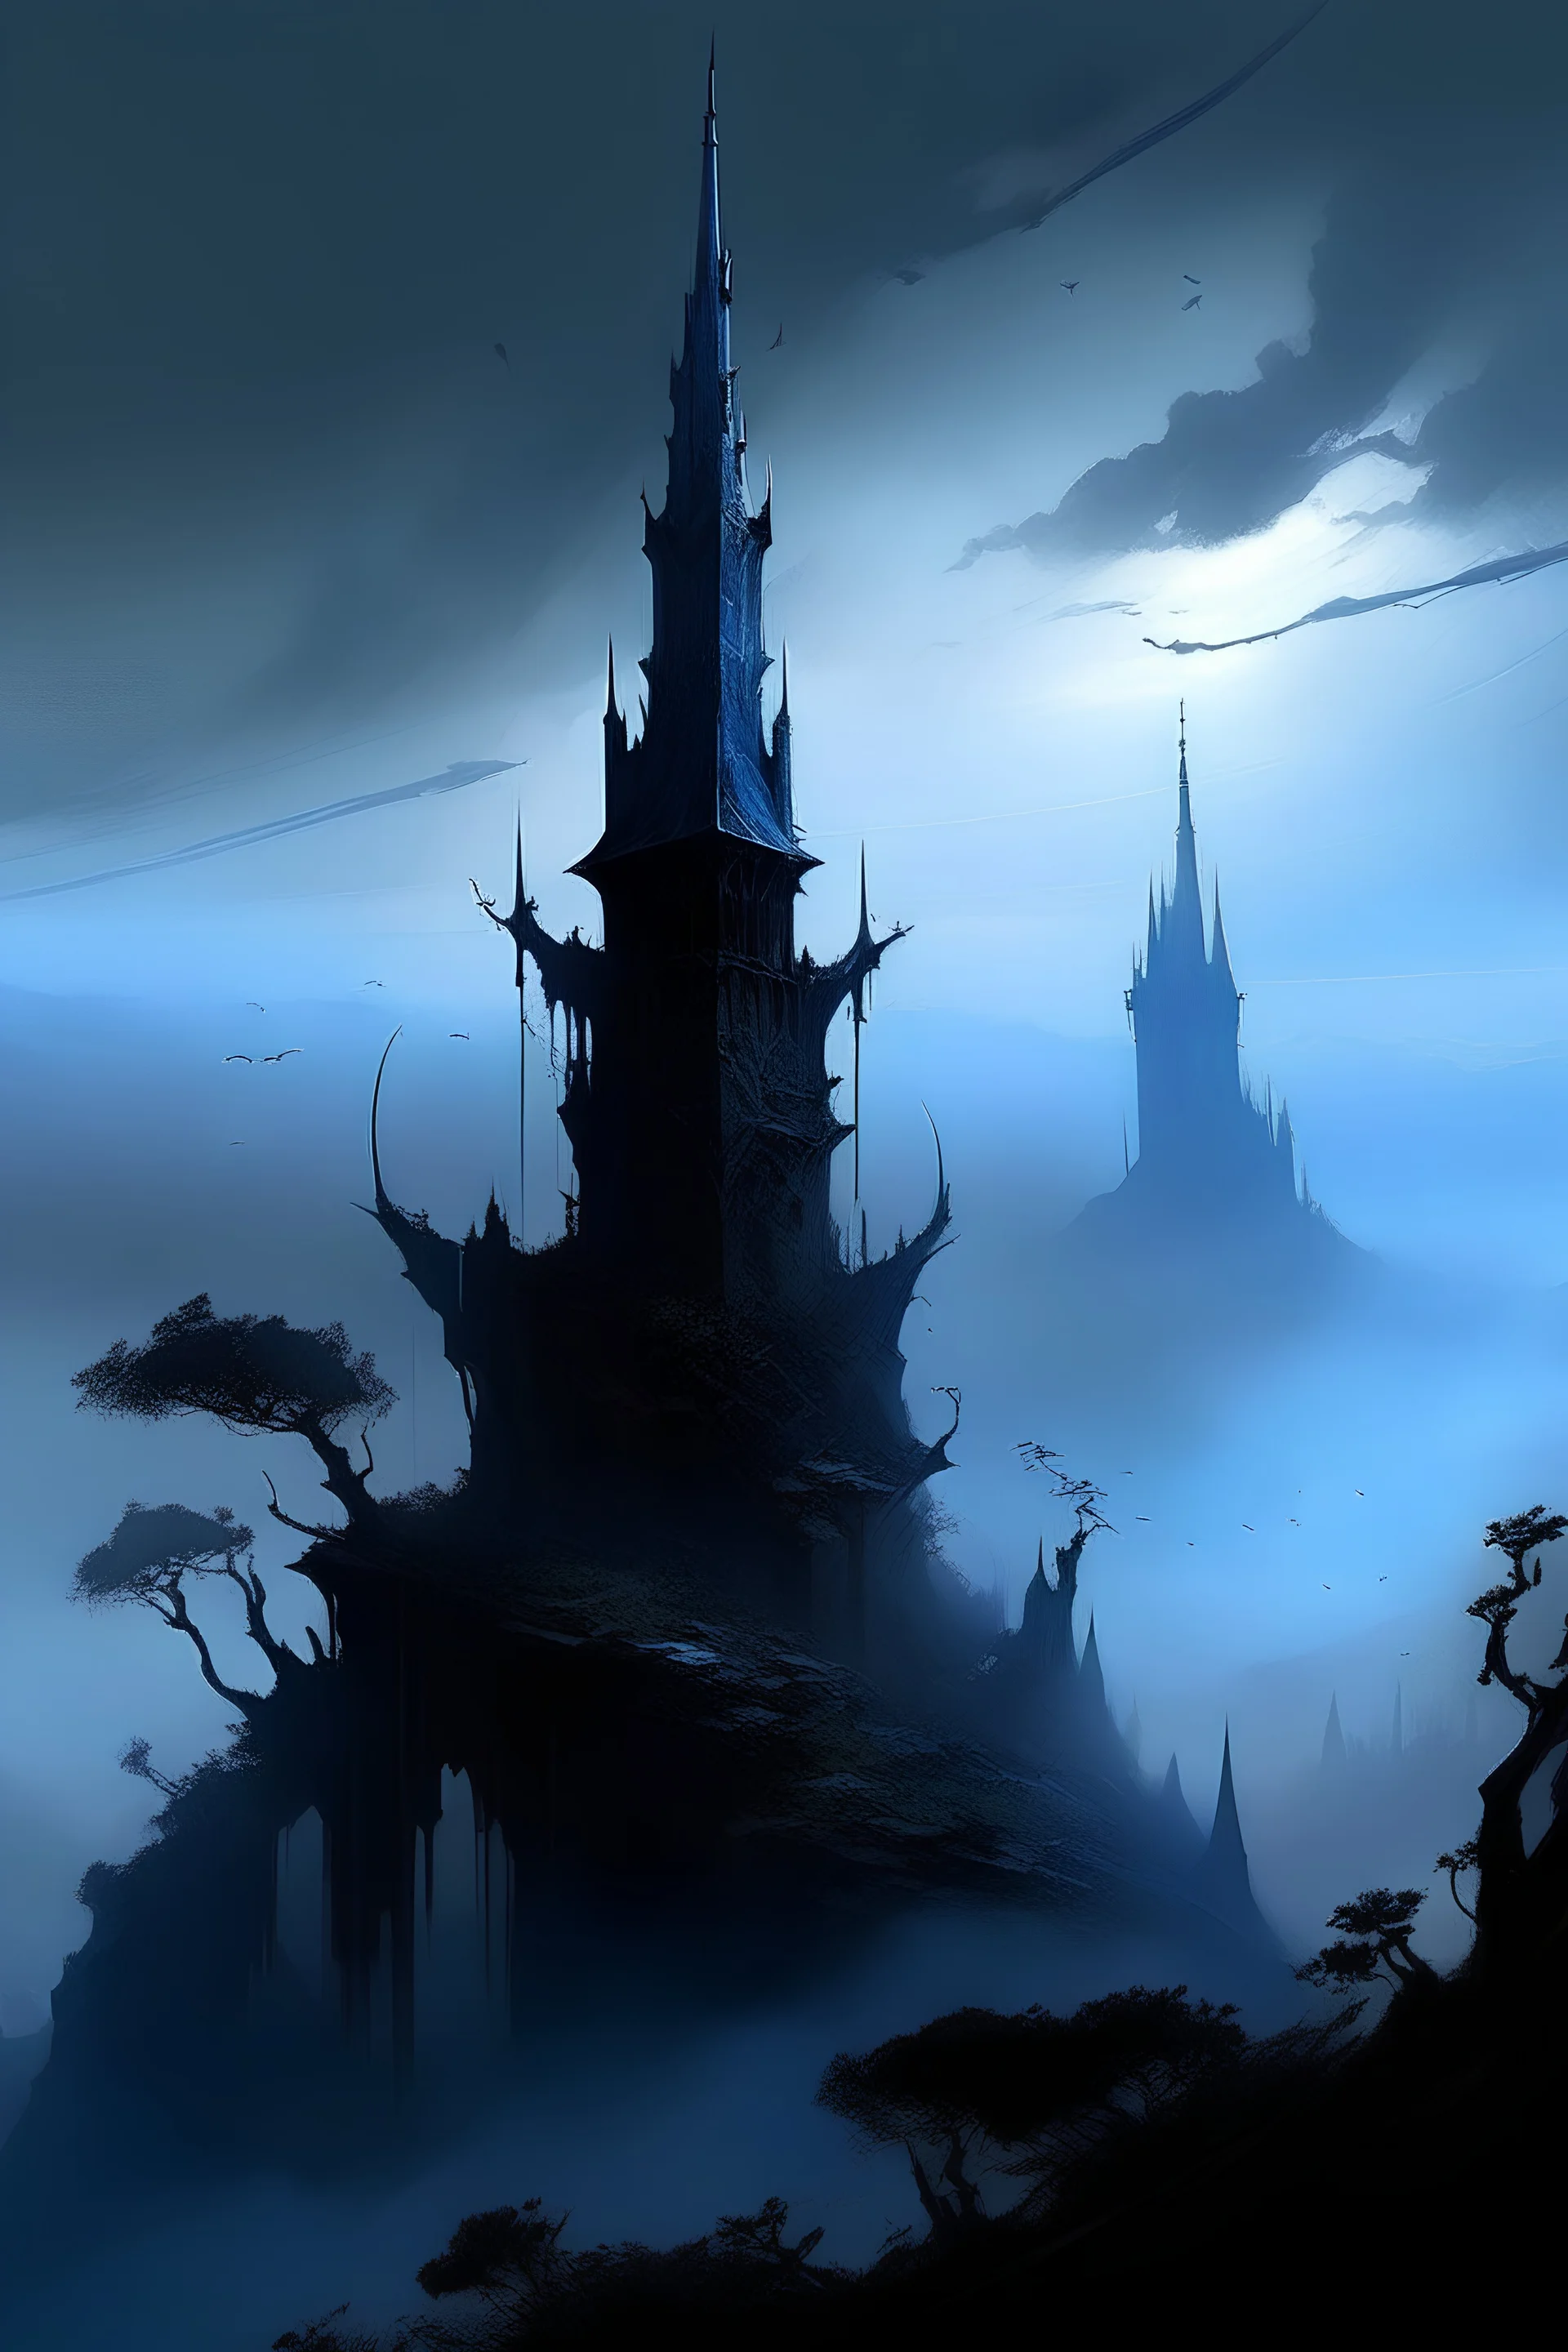 The Shadowreach Spire stands as a foreboding testament to the dark and mystical forces that reside within the Whispering Hollows. Perched atop the Hill of Veiled Enigma, the spire's silhouette cuts through the mist that blankets the surrounding landscape, casting an eerie and imposing shadow. The spire itself is a structure of ancient and weathered stone, reaching high into the sky. Its architecture is a fusion of Gothic and arcane elements, with pointed arches, intricate carvings, and gargoyles